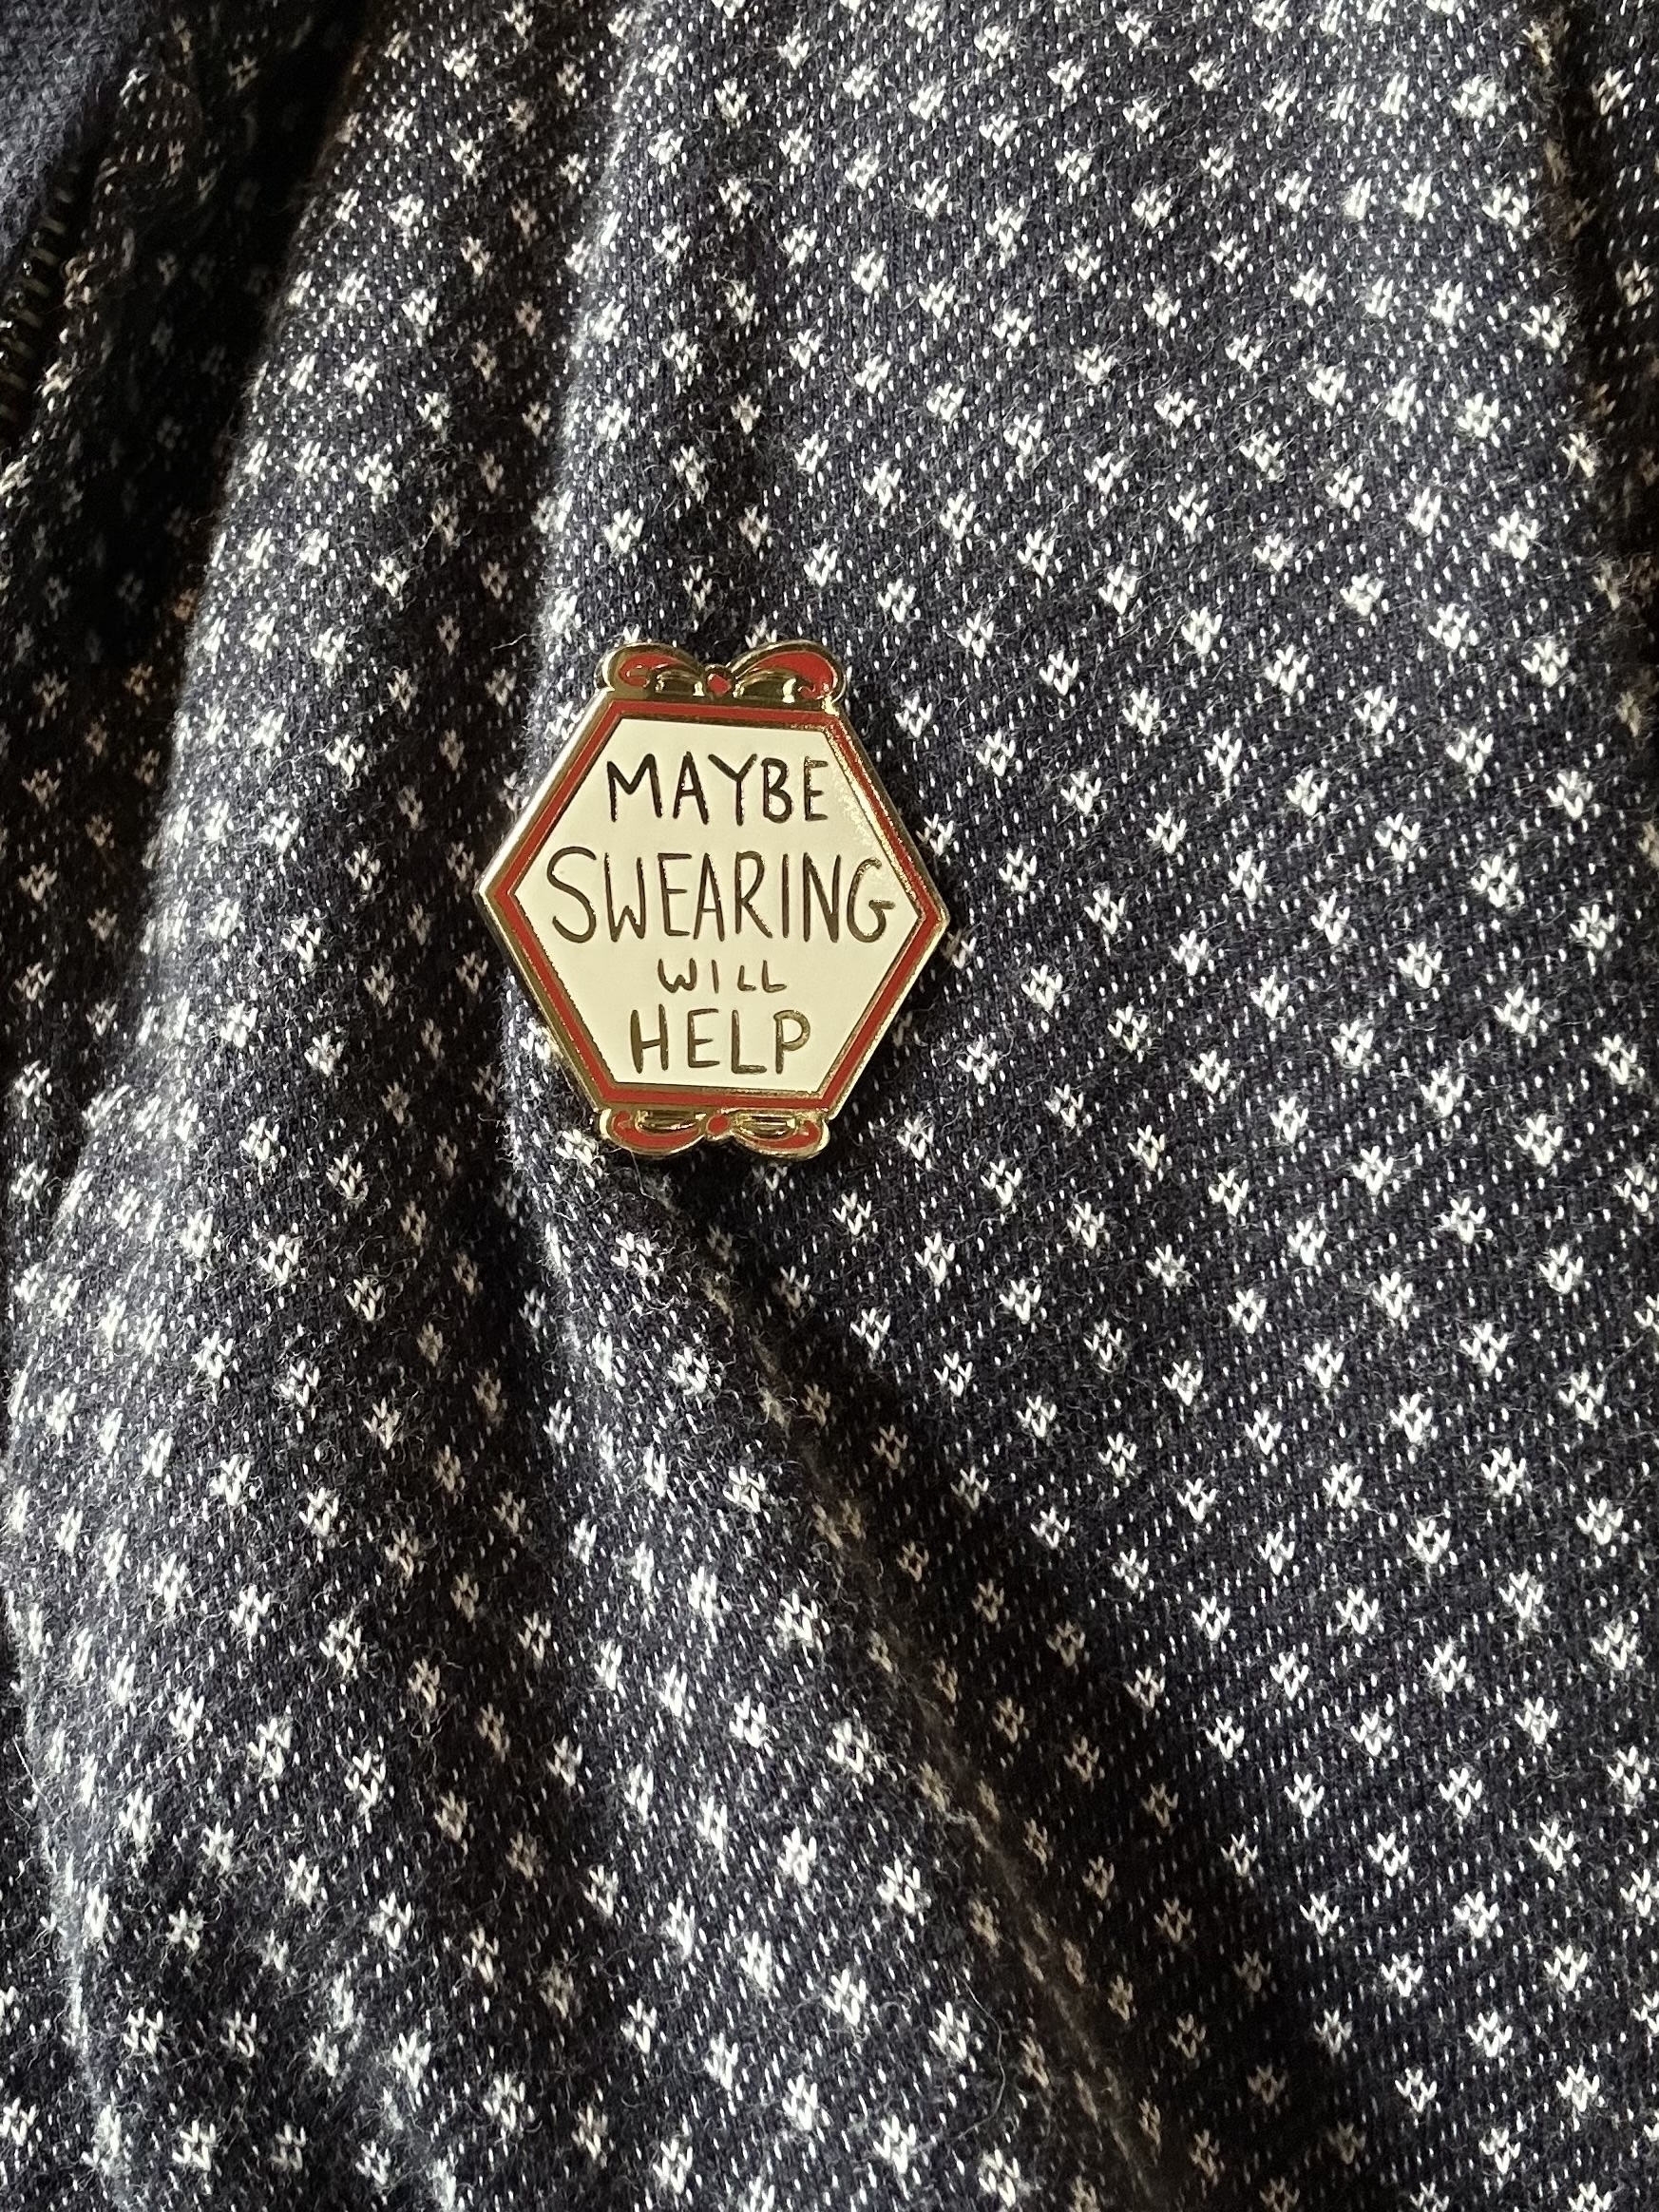 A hexagon shaped badge pinned on a black and white jumper. The badge is white with a red border and has “maybe swearing will help” in gold letters.